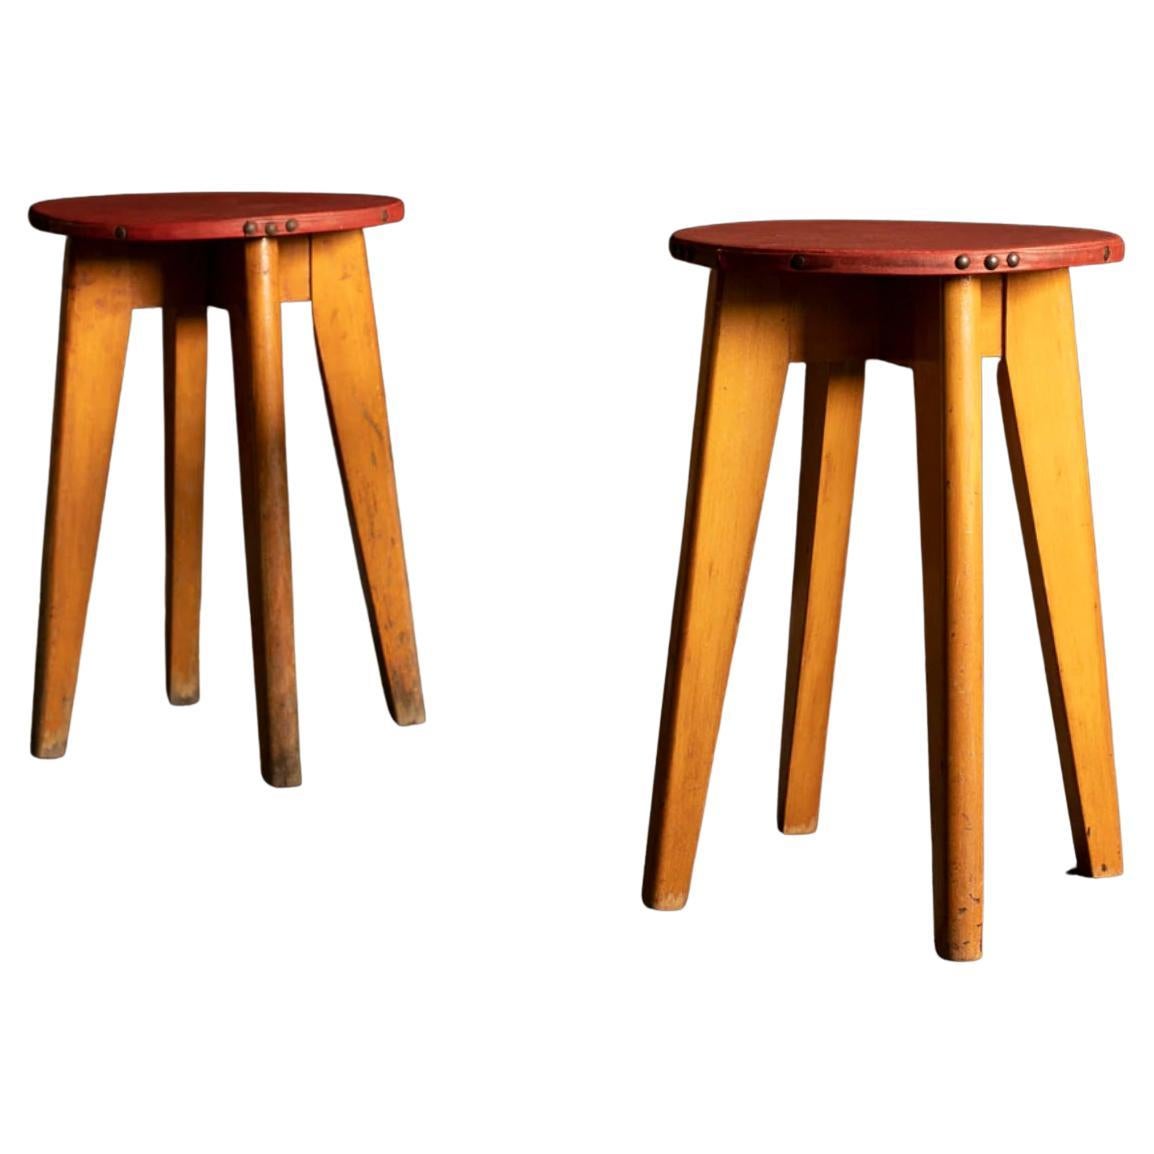 Set of 2 Vintage Stools From Belgium